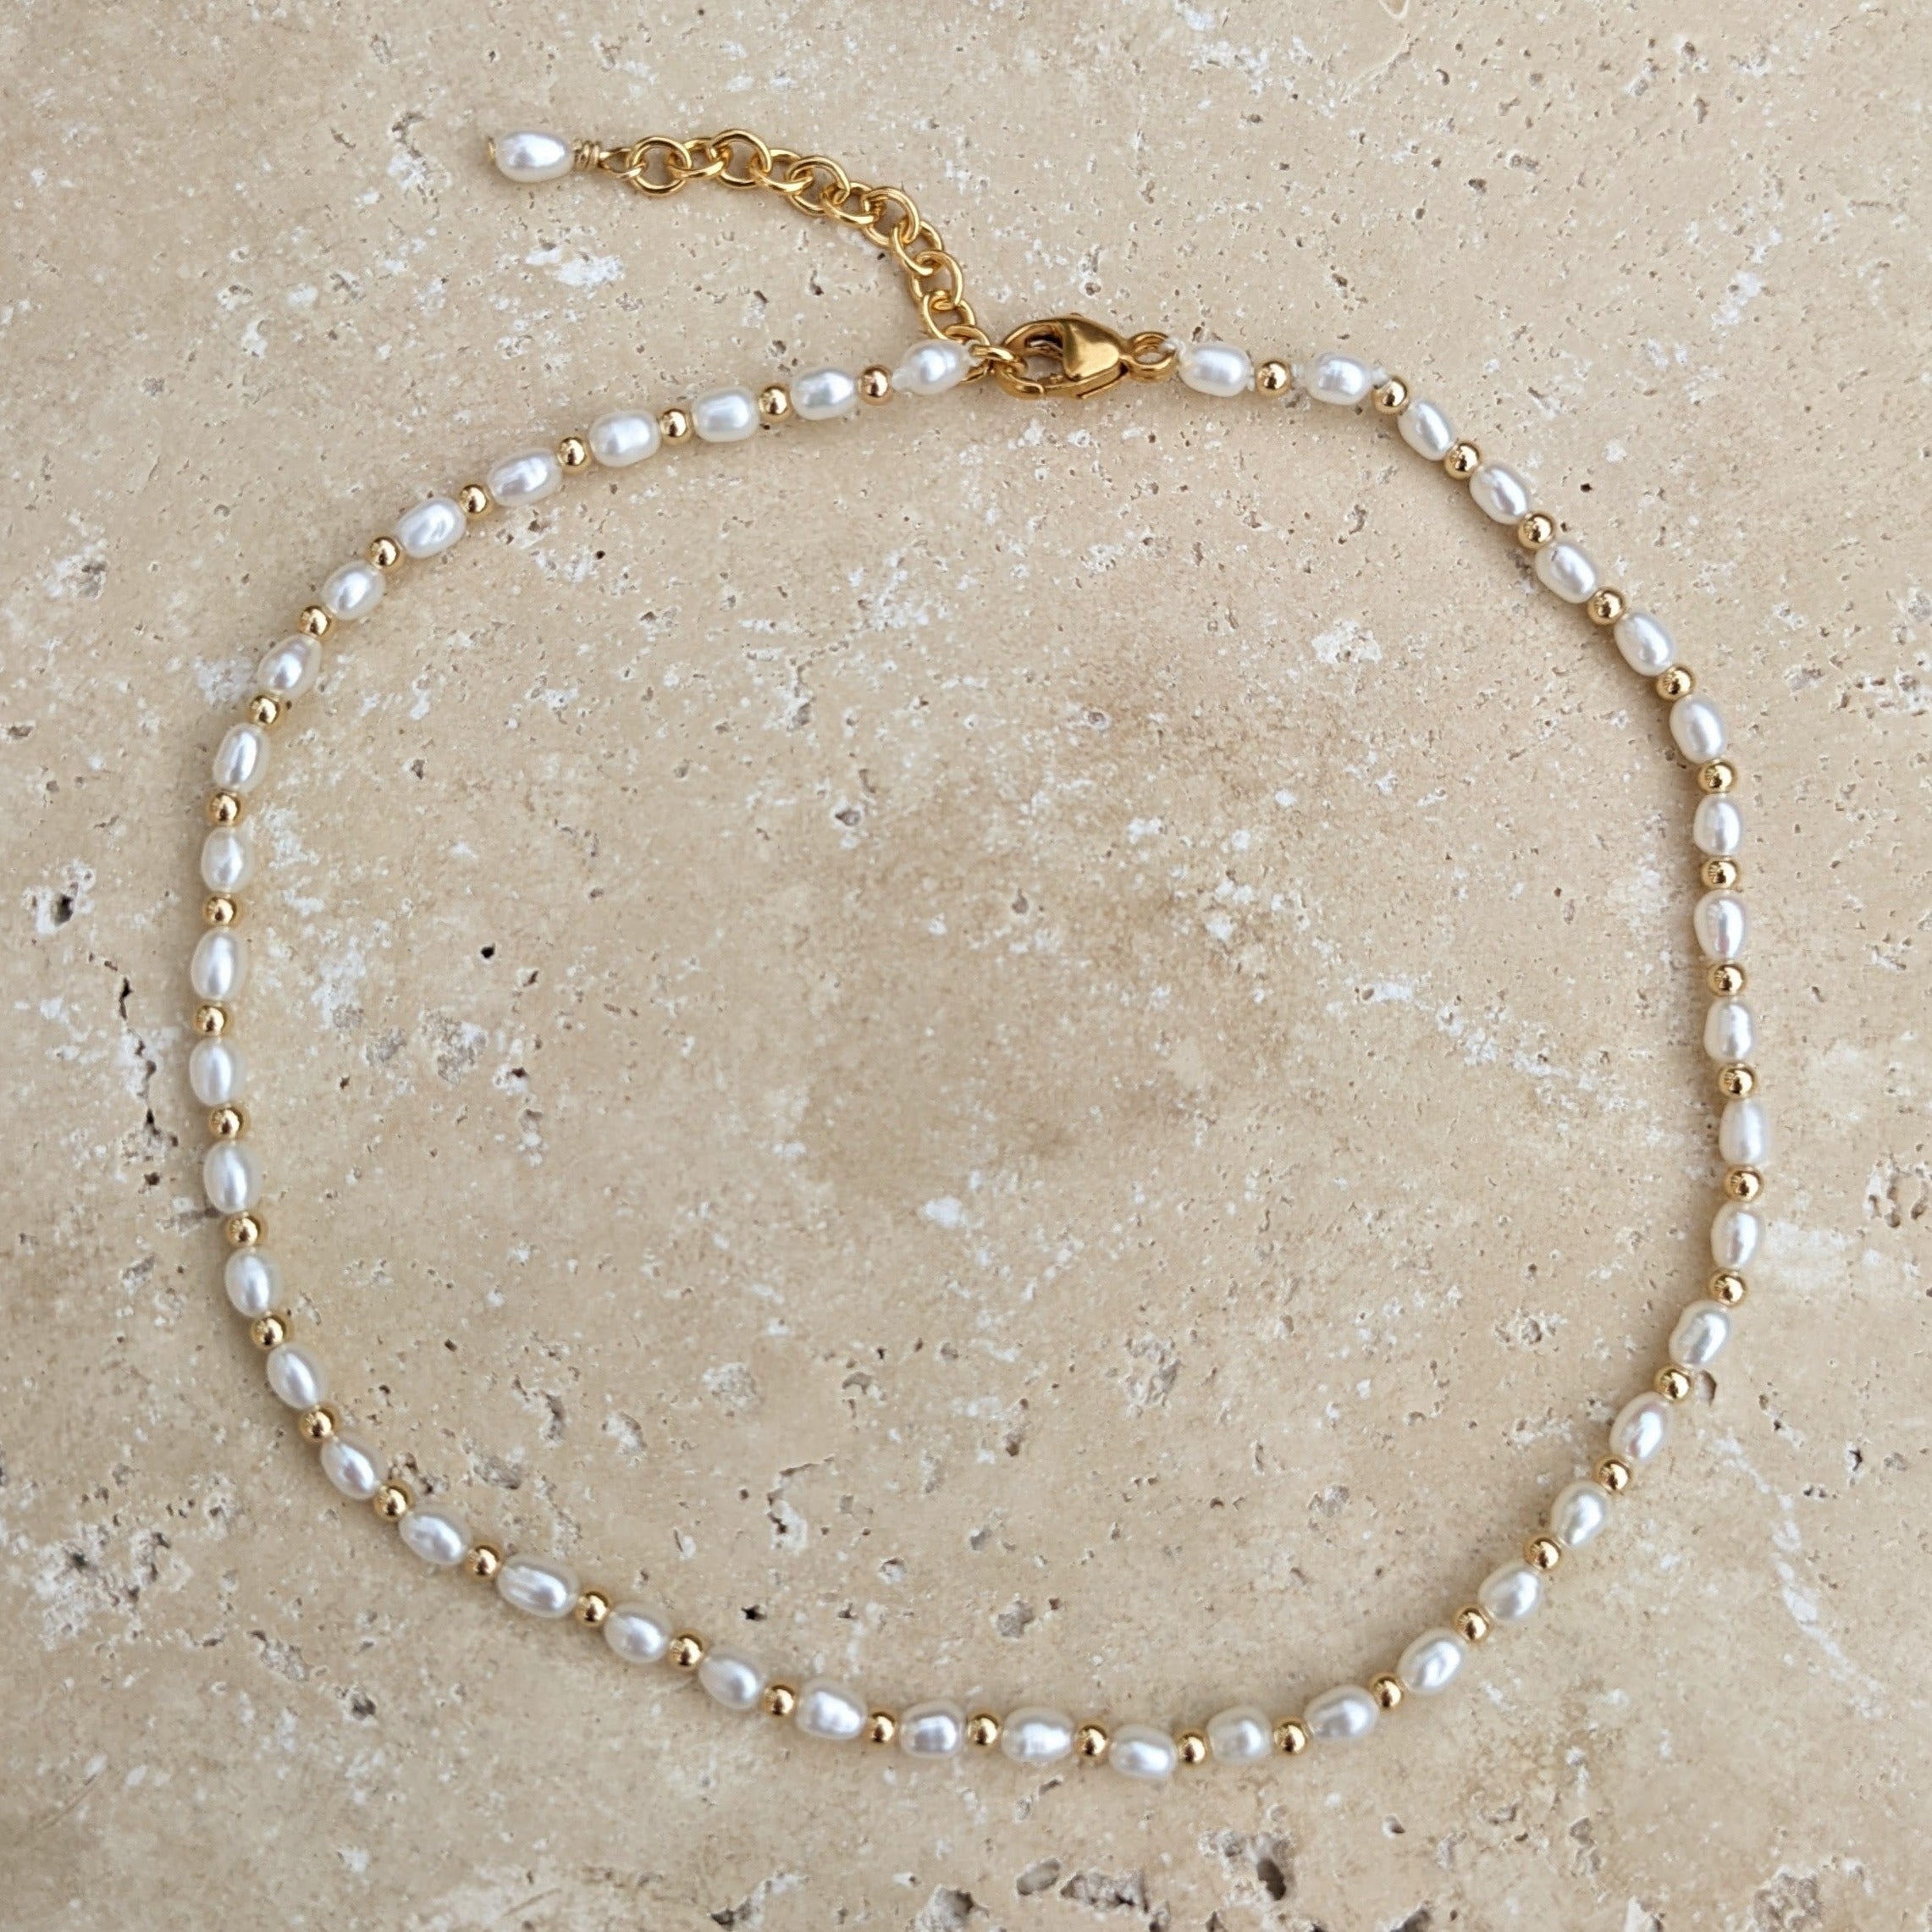 Tiny pearl and bead anklet with gold adjustable clasp